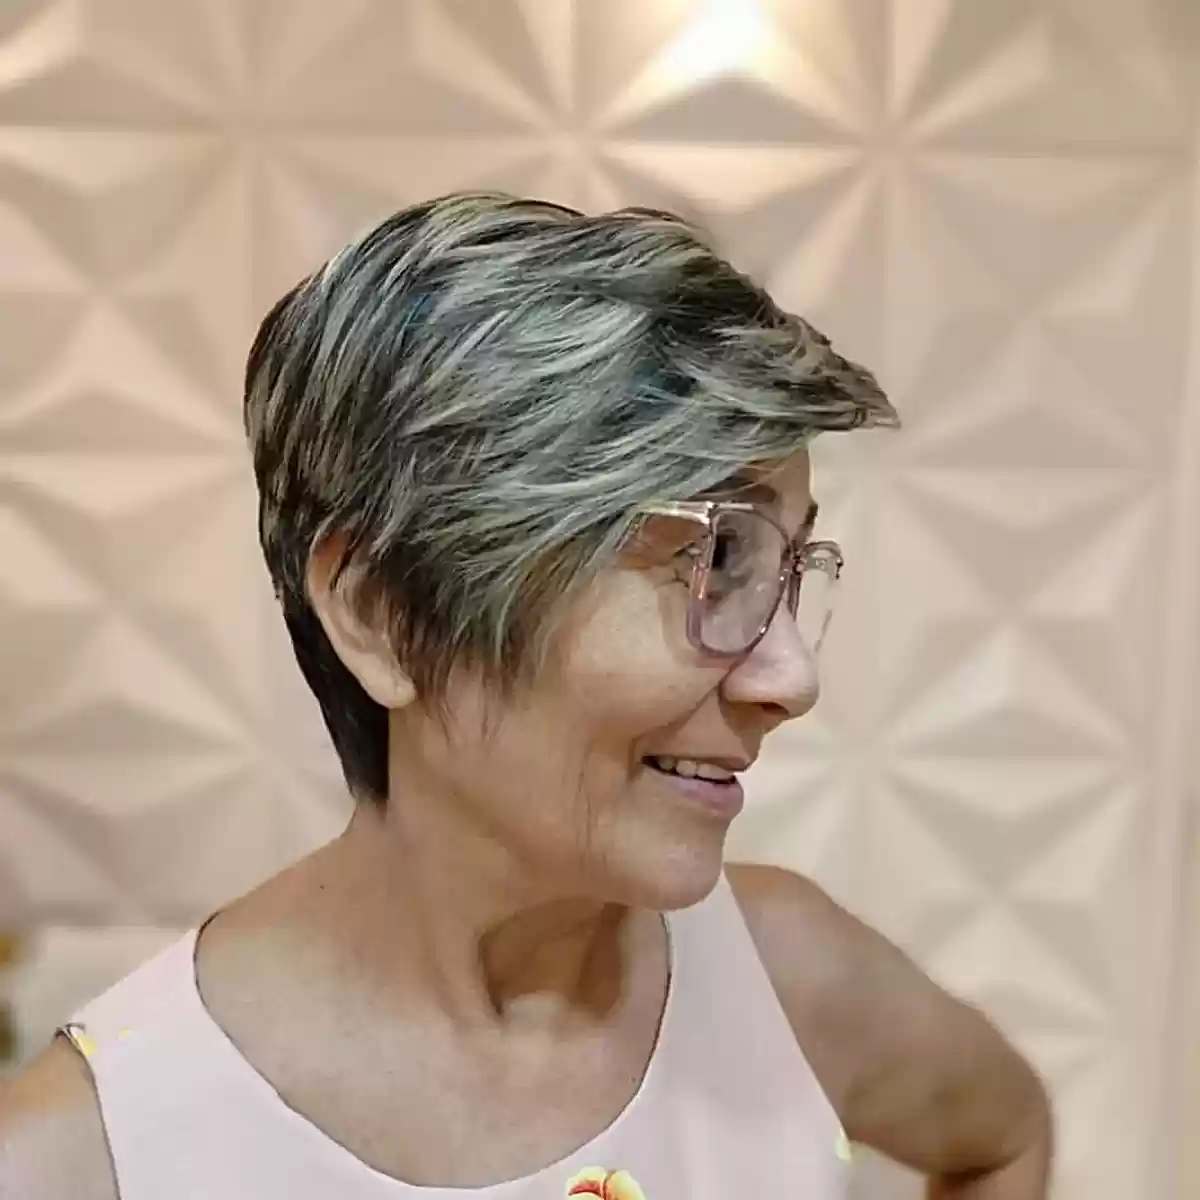 Short Black Hair with Ash Highlights on Women Over 60 Wearing Specs